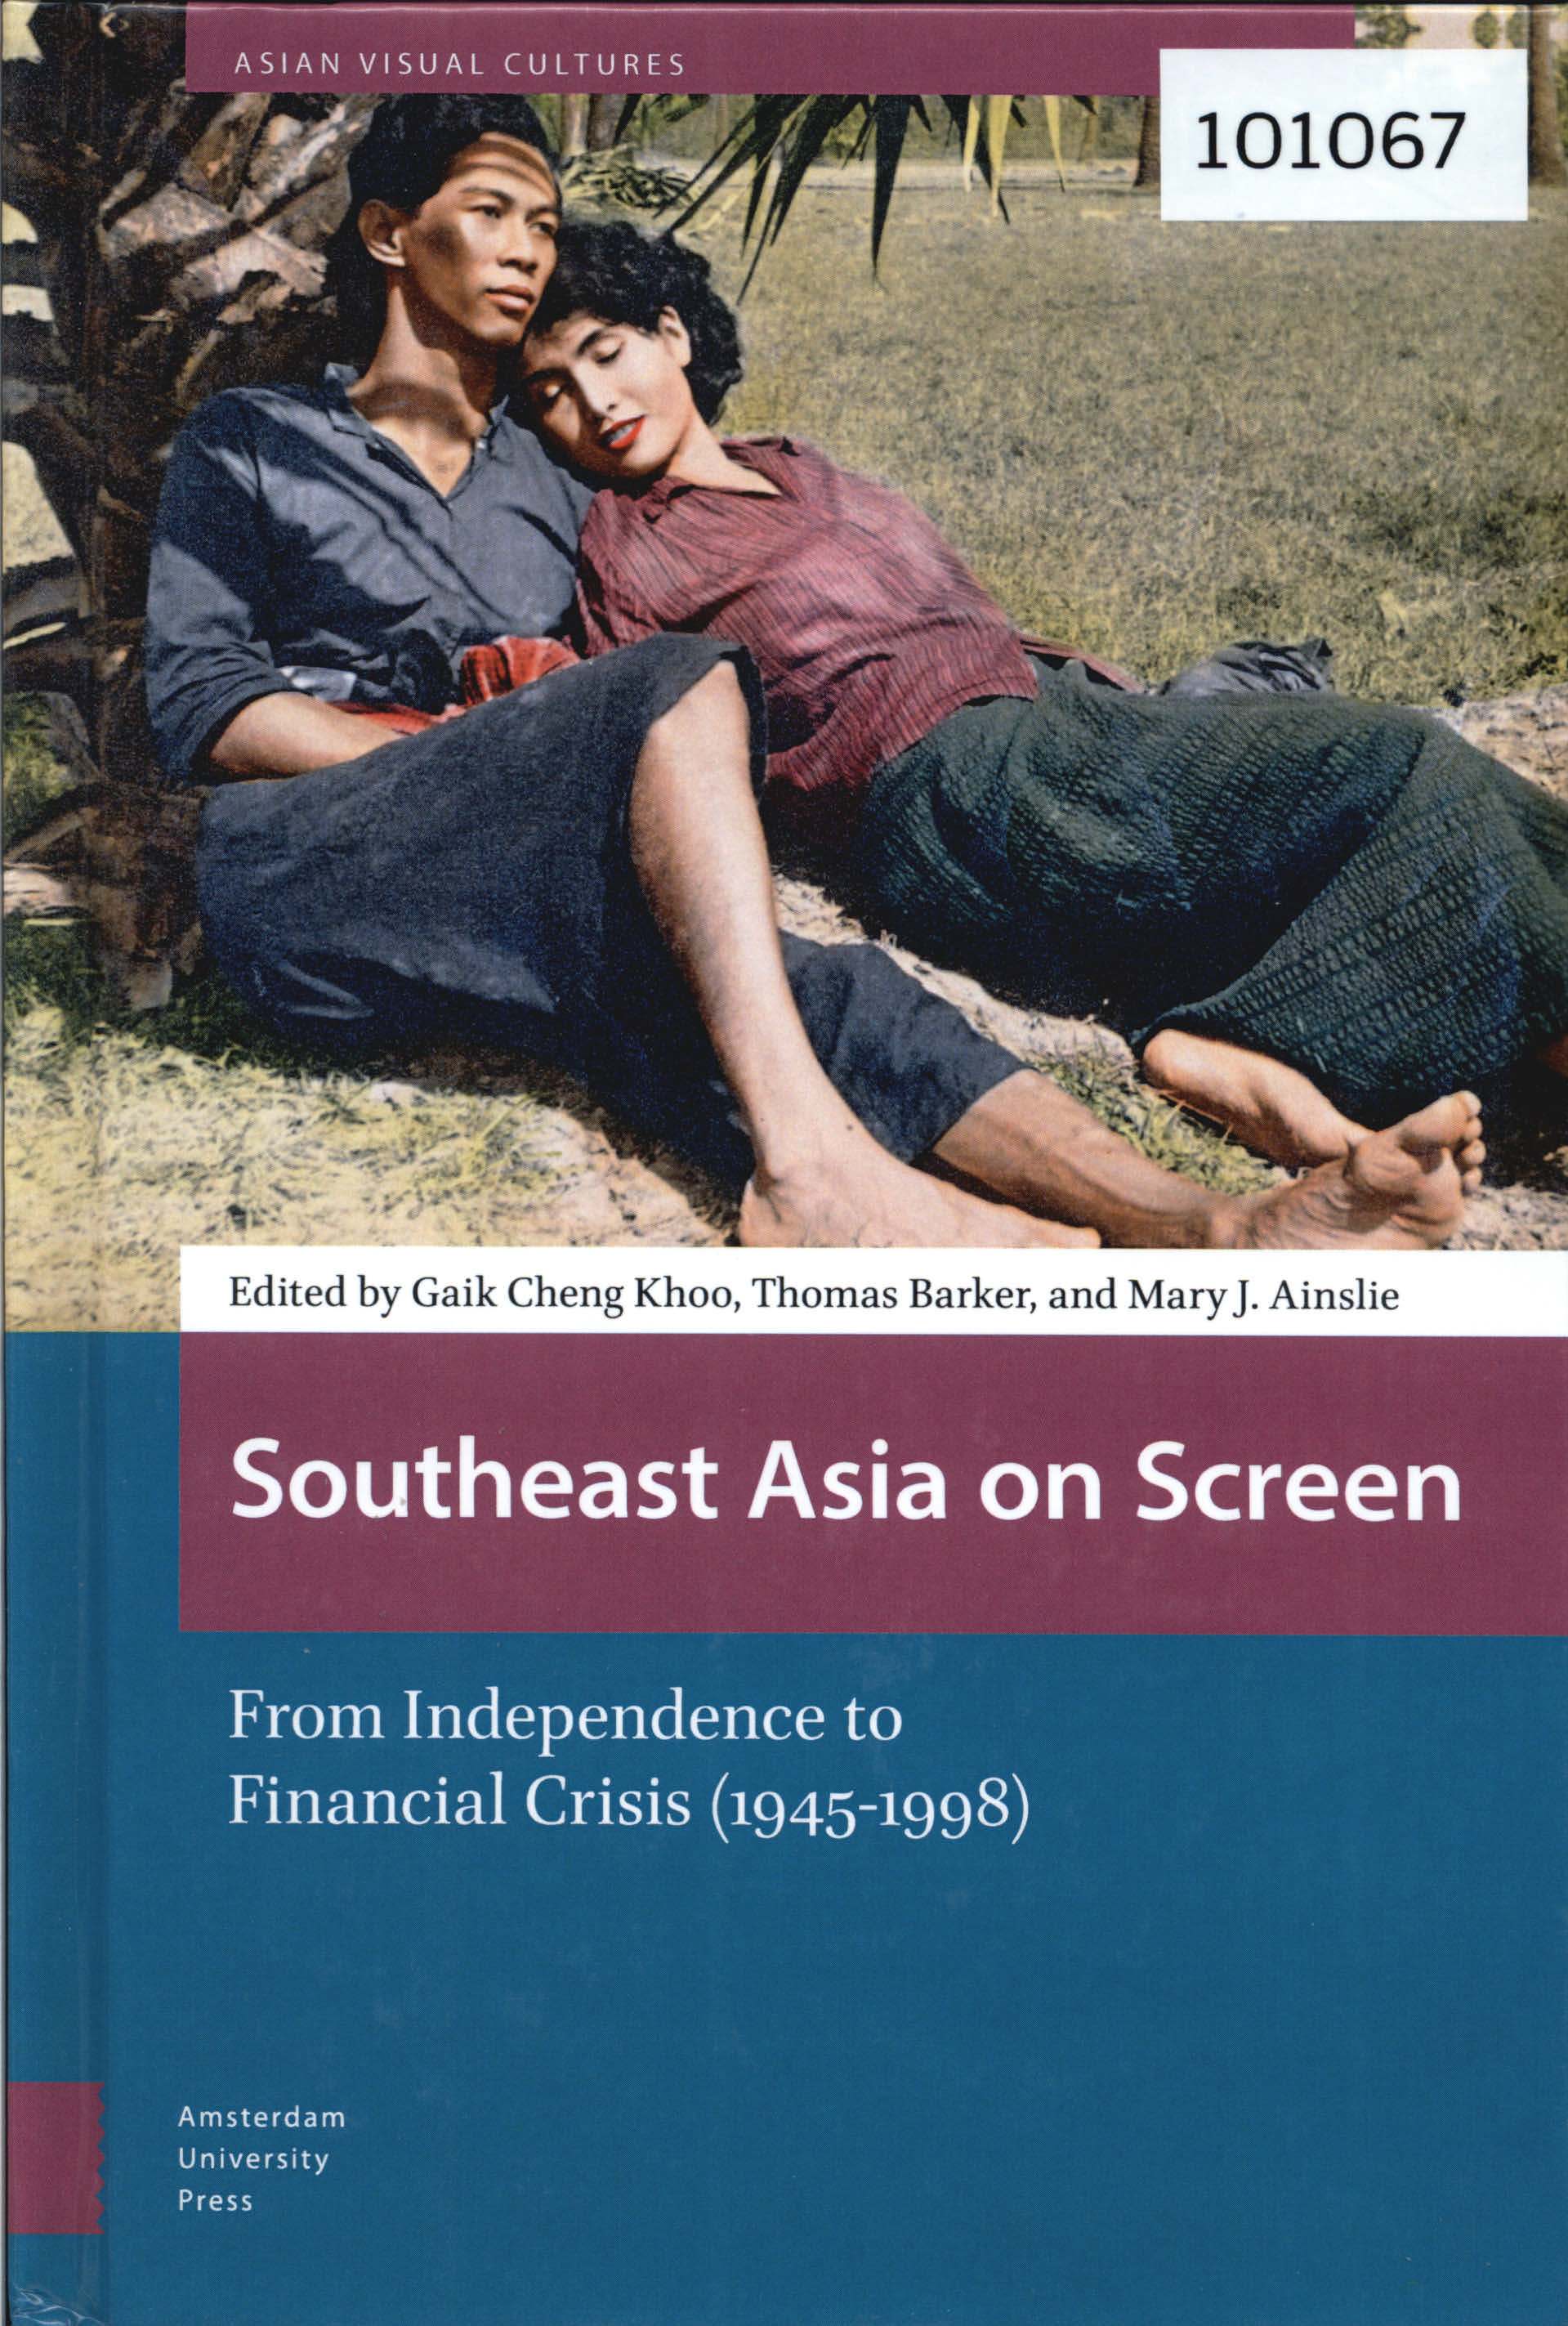 Southeast Asia on Screen: From Independence to Financial Crisis (1945-1998)